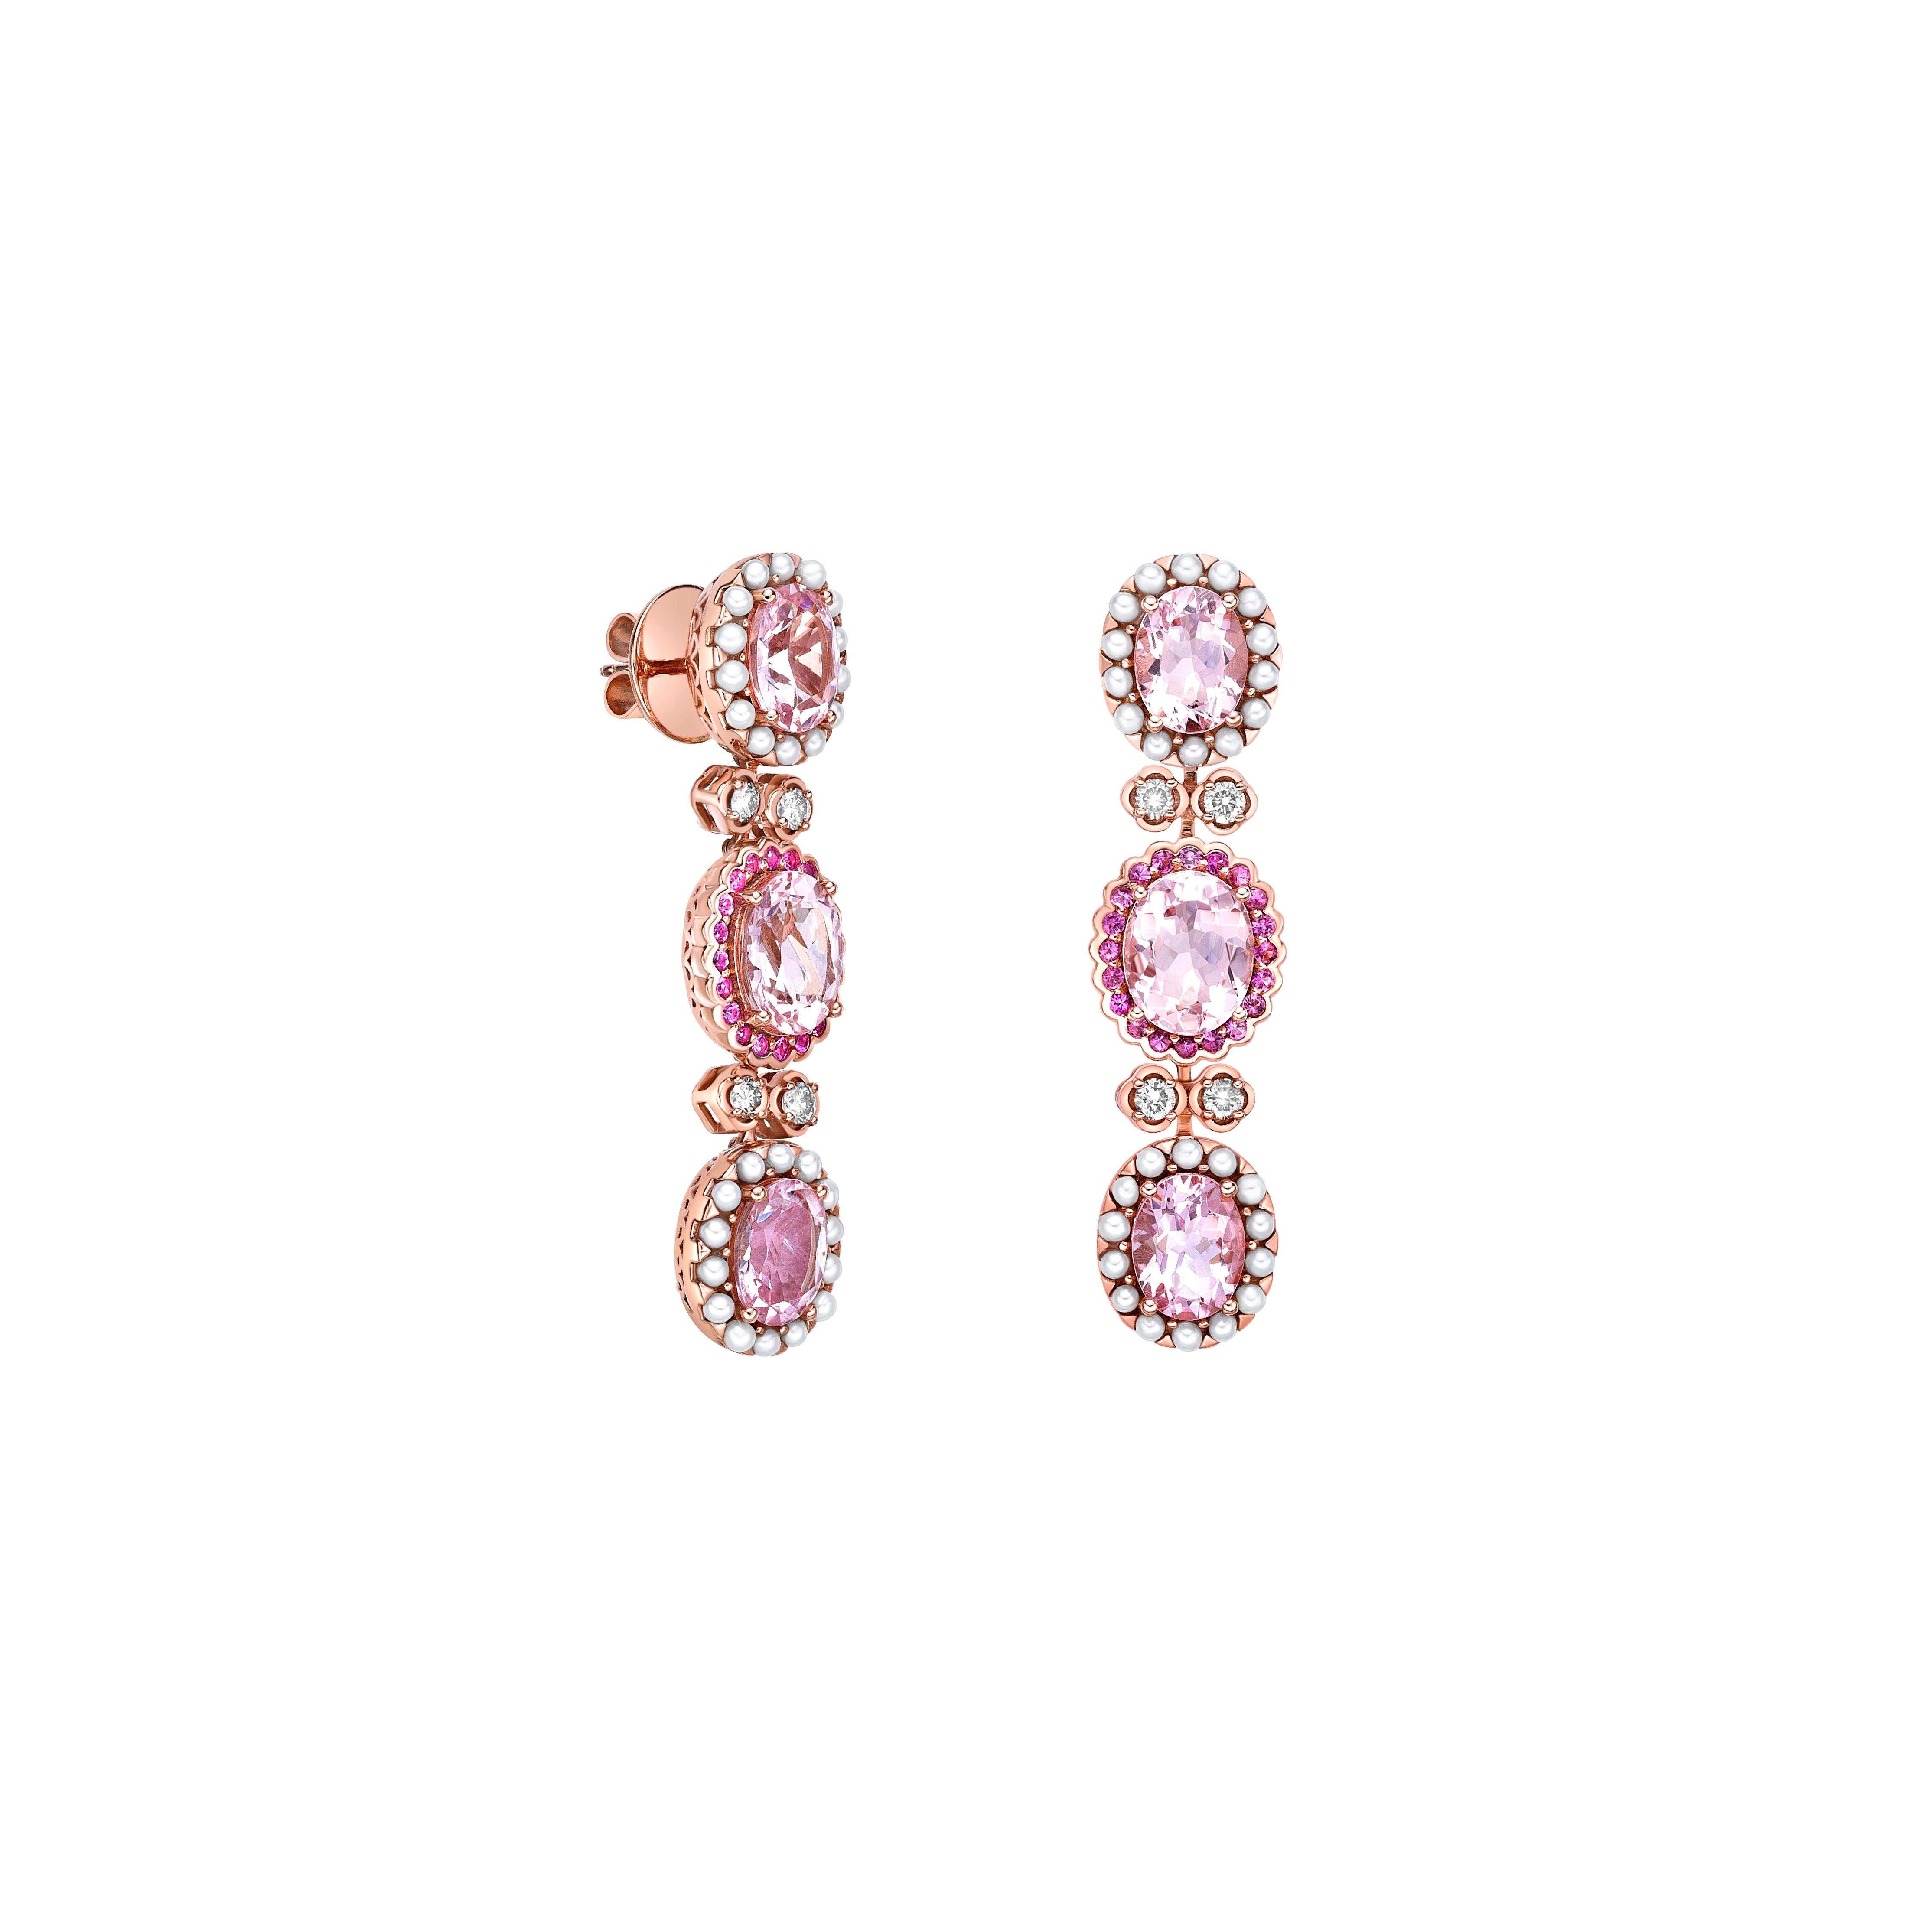 Our Cherry Blossom collection uniquely pairs these pretty pink morganites with a combination of pearls, pink tourmalines and diamonds. Set in rose gold this collection is elegant and classy with any look. 

Pink Morganite Earring with Tourmaline,